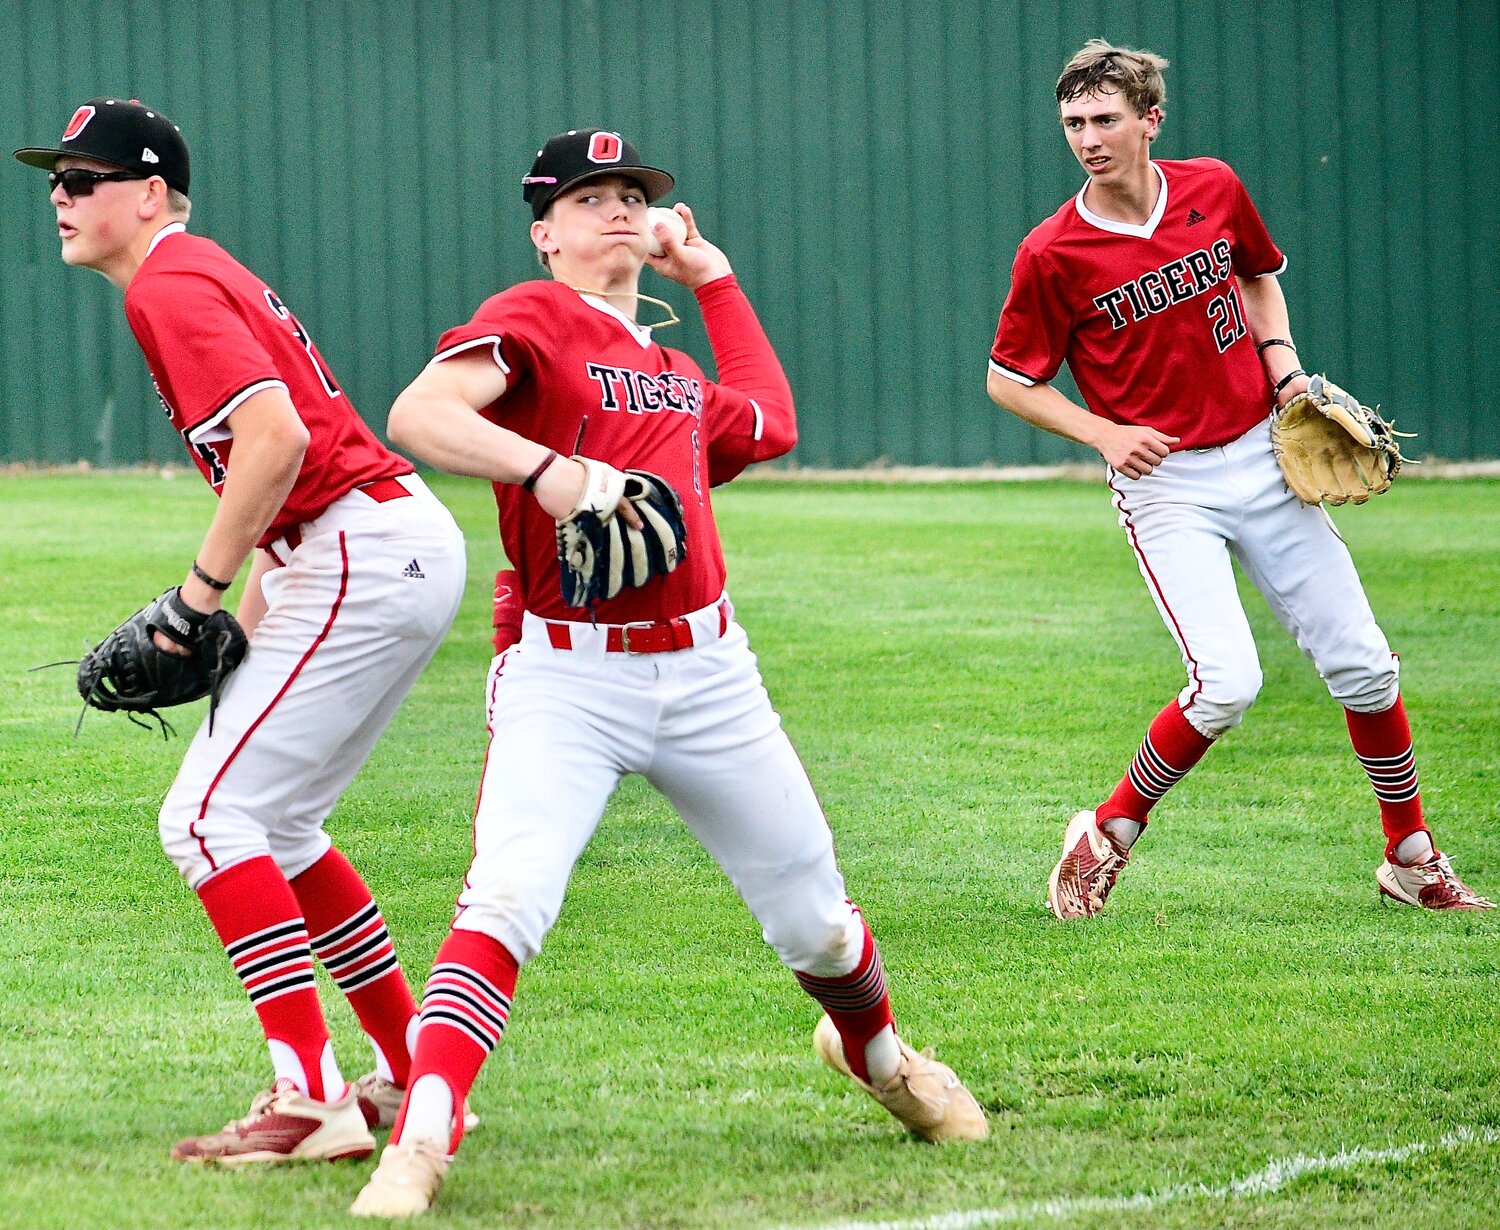 OZARK'S RYLAN SUTTON prepares to return the ball to the infield in between teammates Truman Griessel and Alex Nimmo.